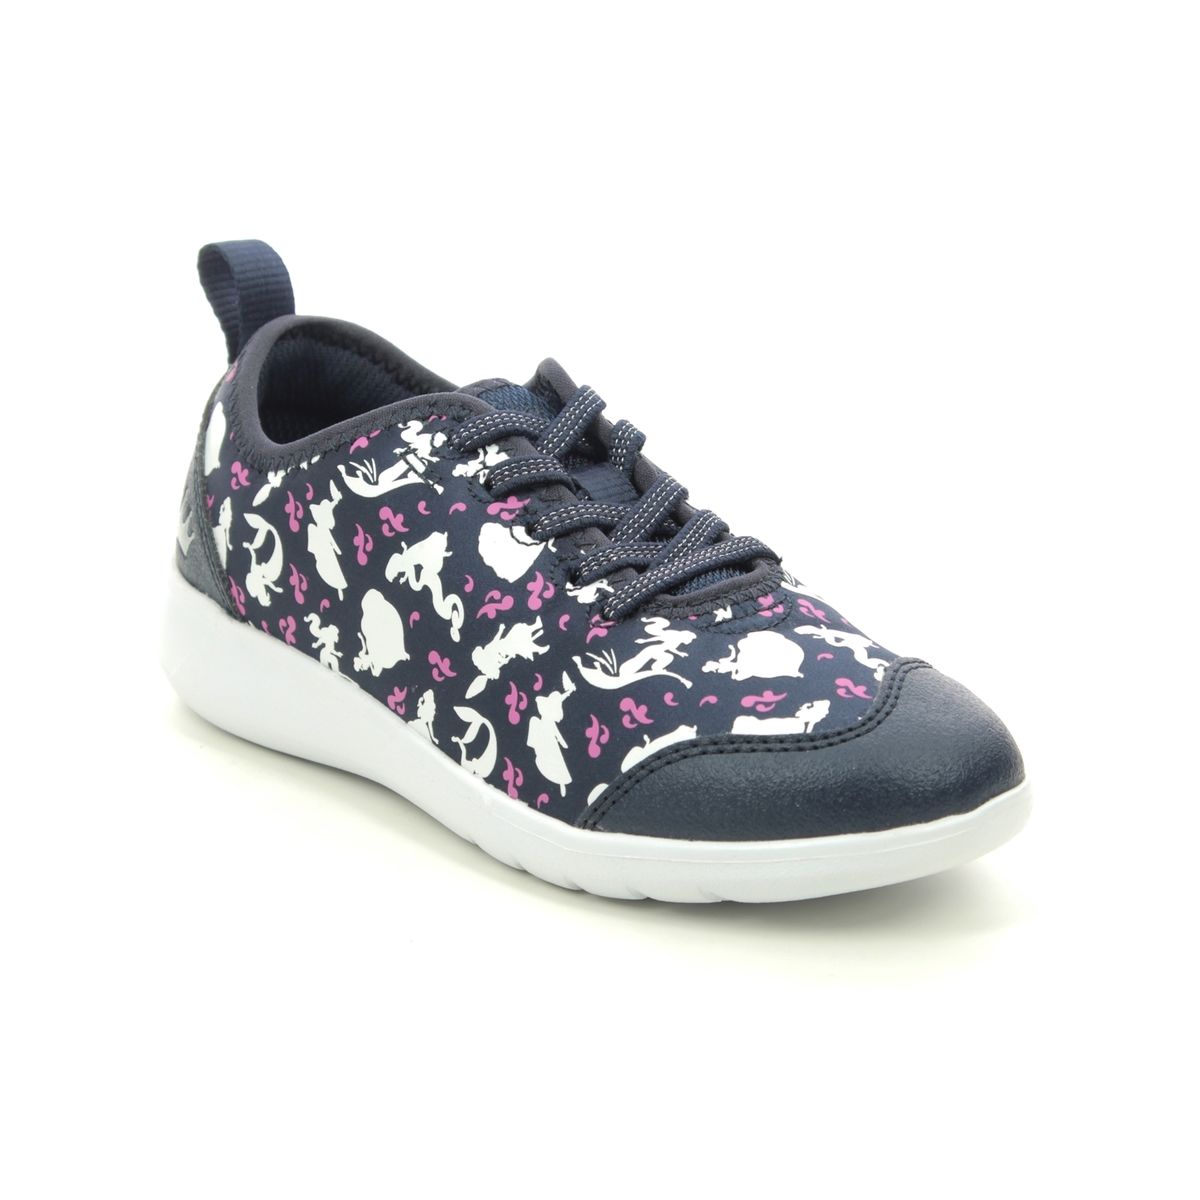 Clarks Scape Voyage K Disney Navy Kids girls trainers 4907-36F in a Plain Man-made in Size 12.5